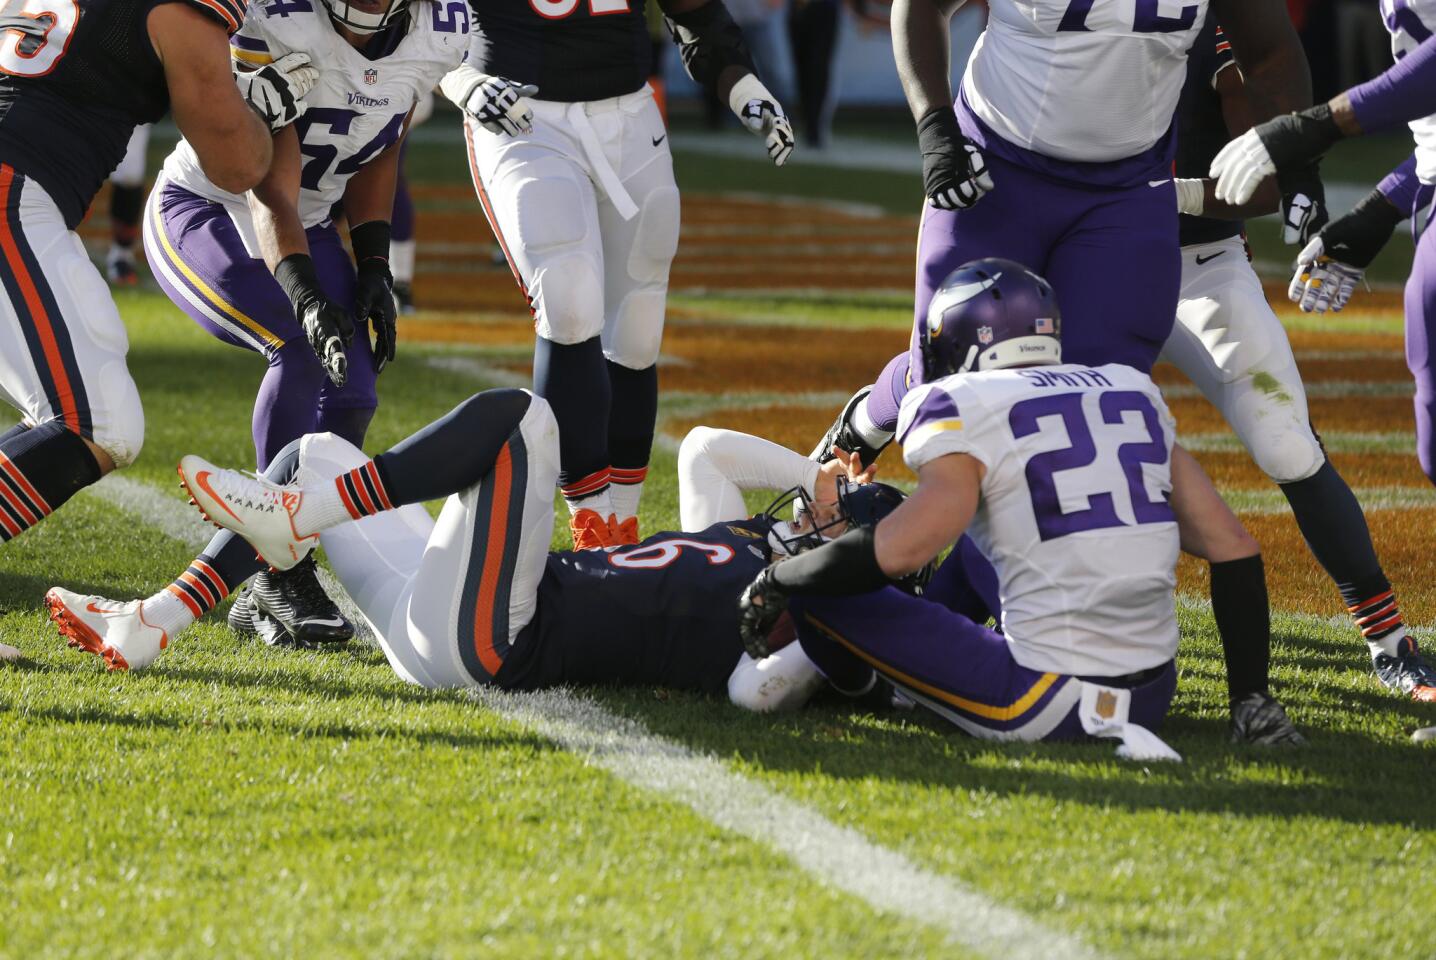 Jay Cutler reacts after diving into the end zone for a touchdown against the Vikings in the second half.